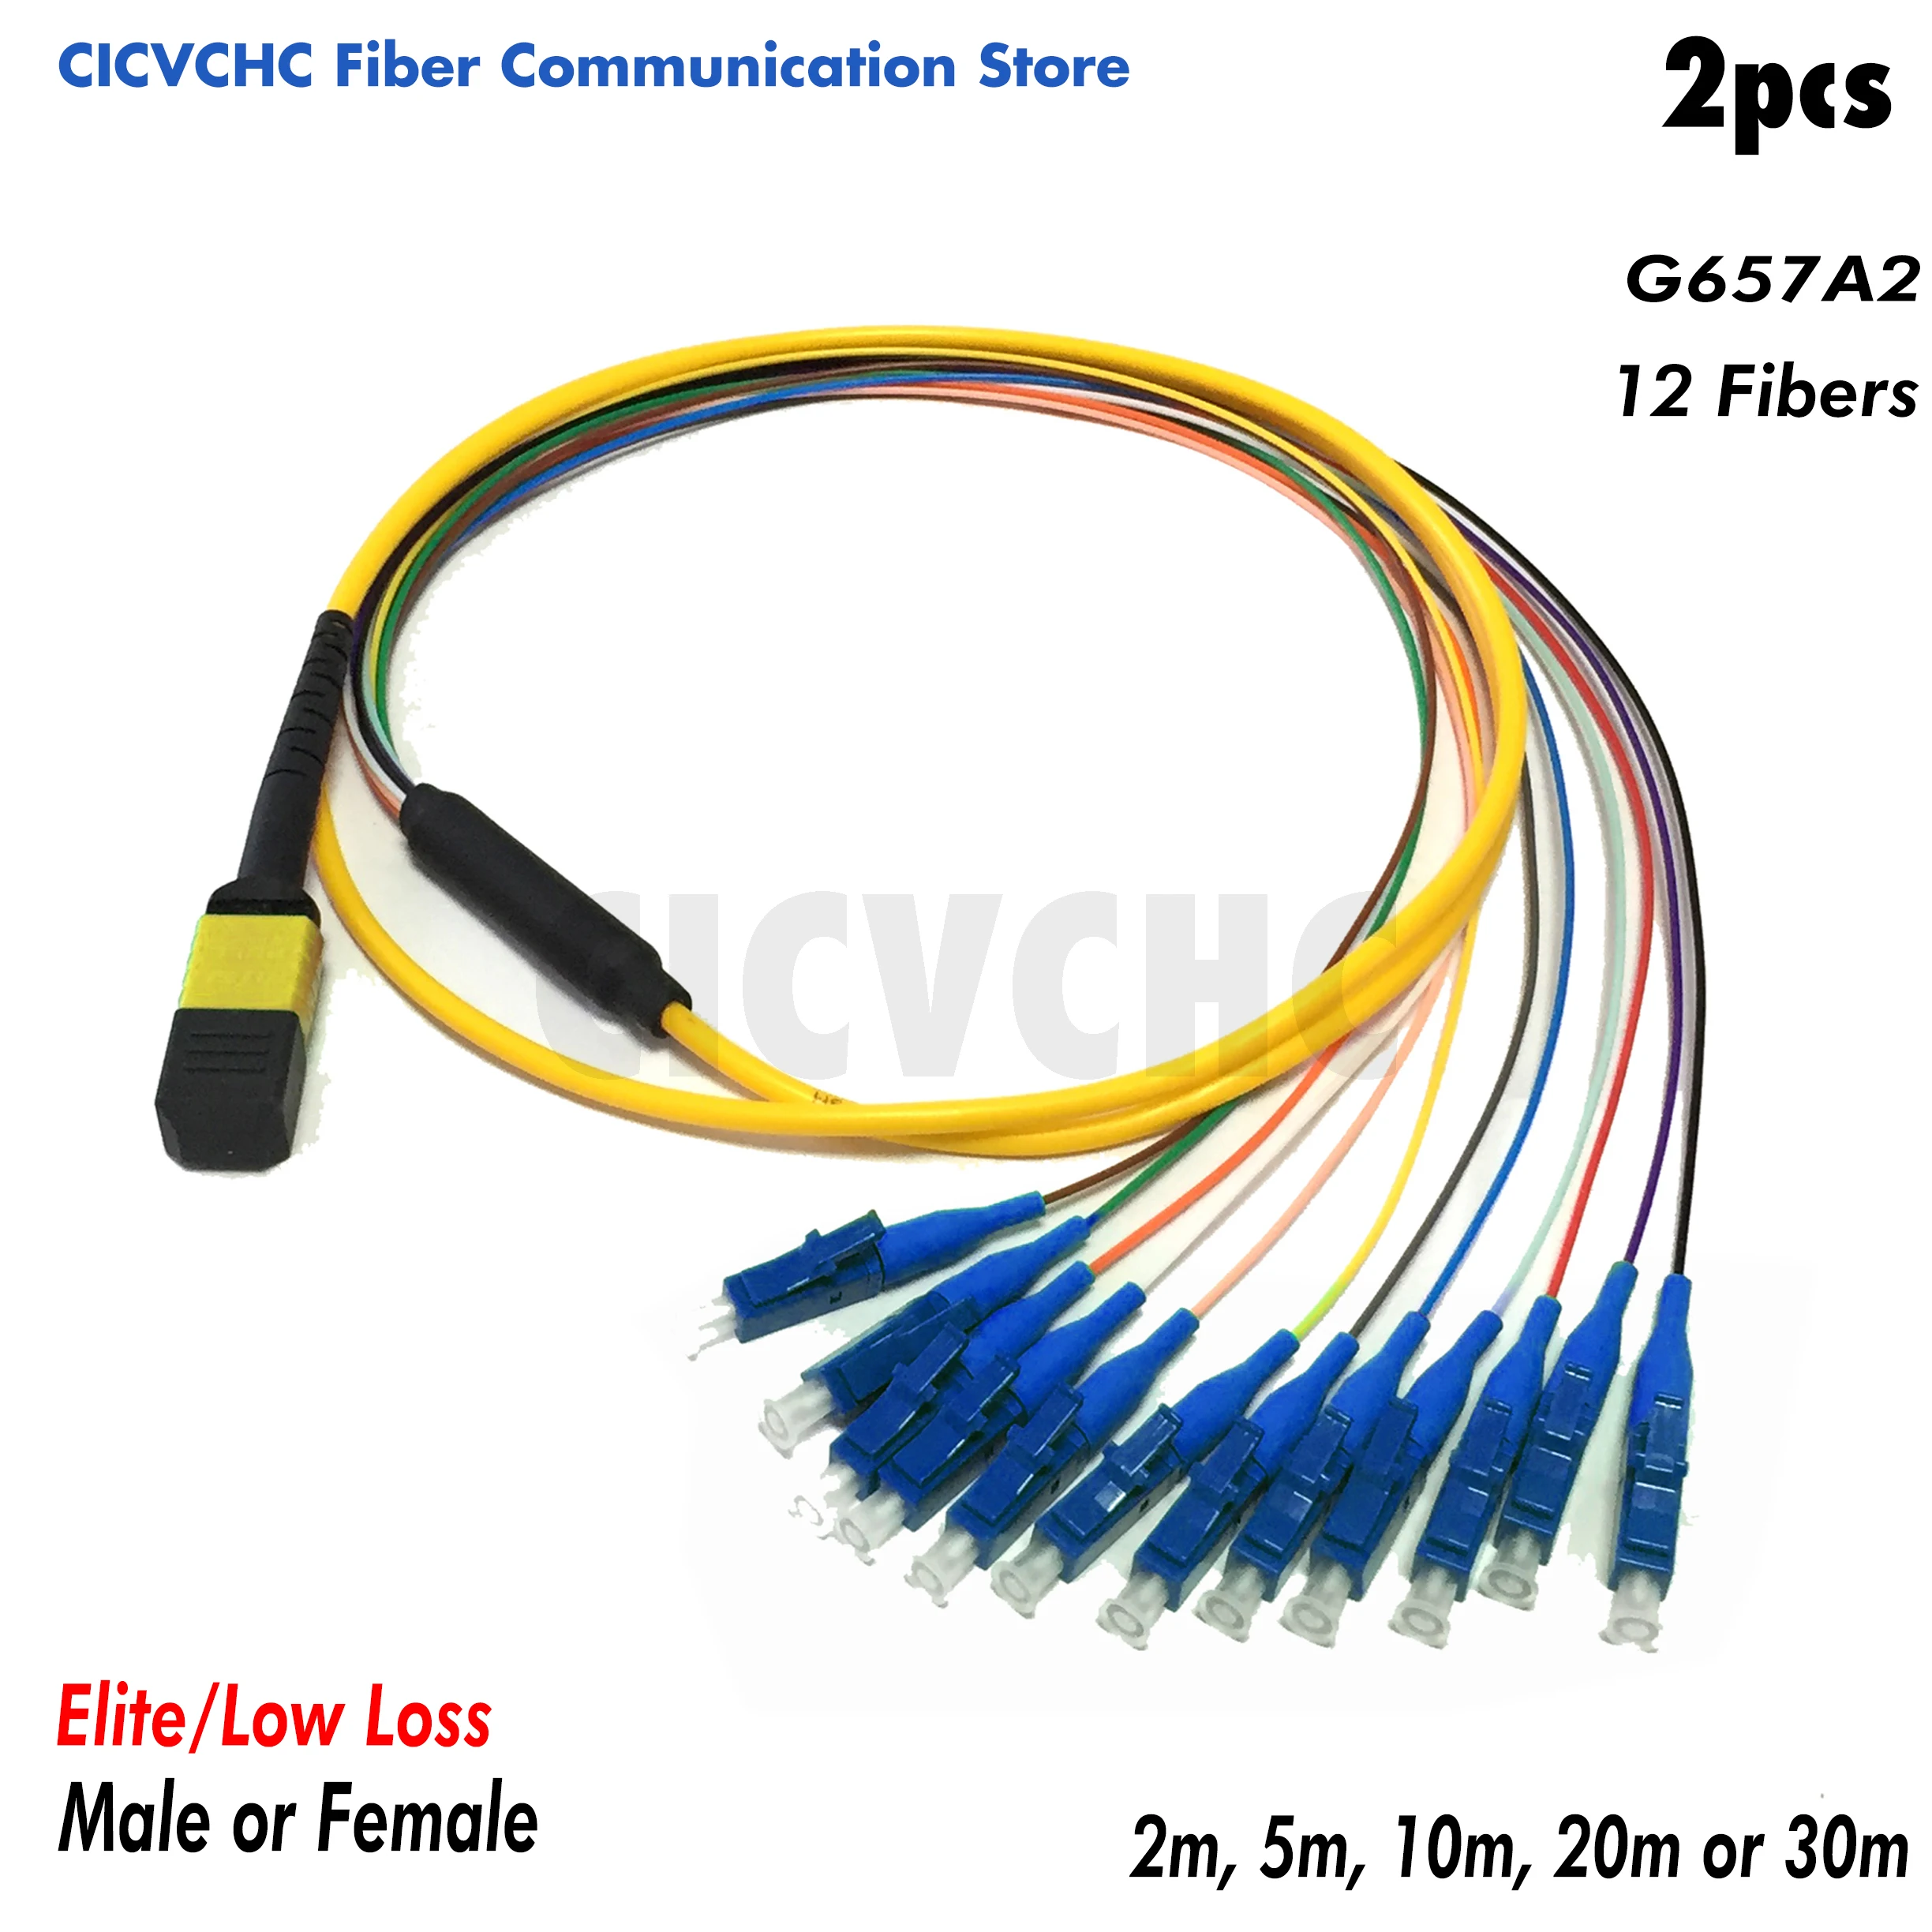 2pcs 12 fibers-MPO/APC Fanout LC/UPC -G657A2-Elite/Low loss-Male/Female with 0.9mm-2m to 30m/MPO Assembly